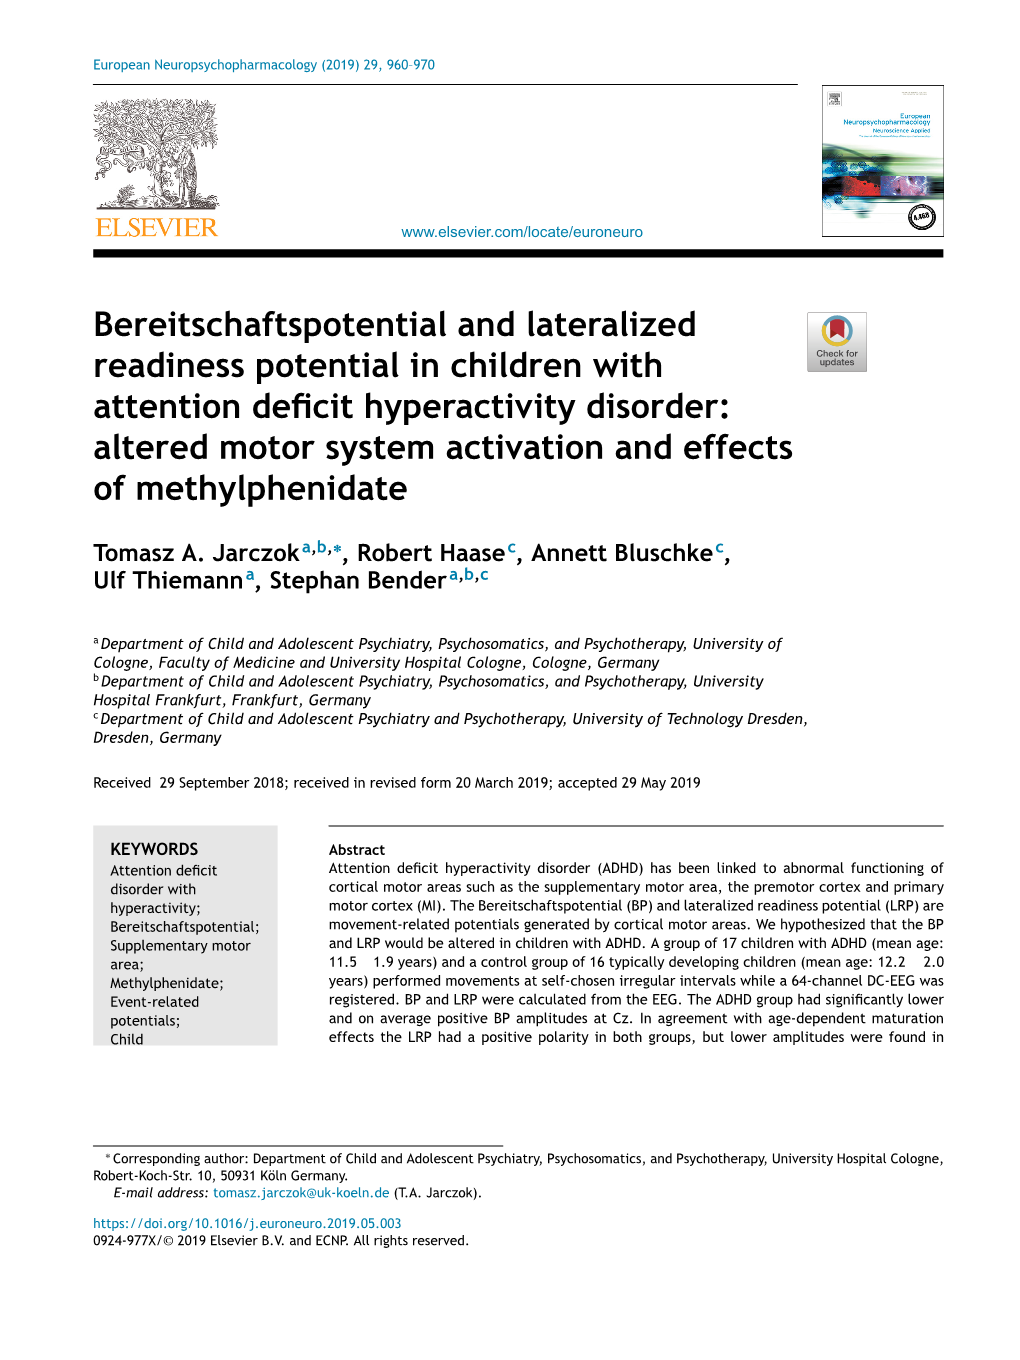 Bereitschaftspotential and Lateralized Readiness Potential in Children With